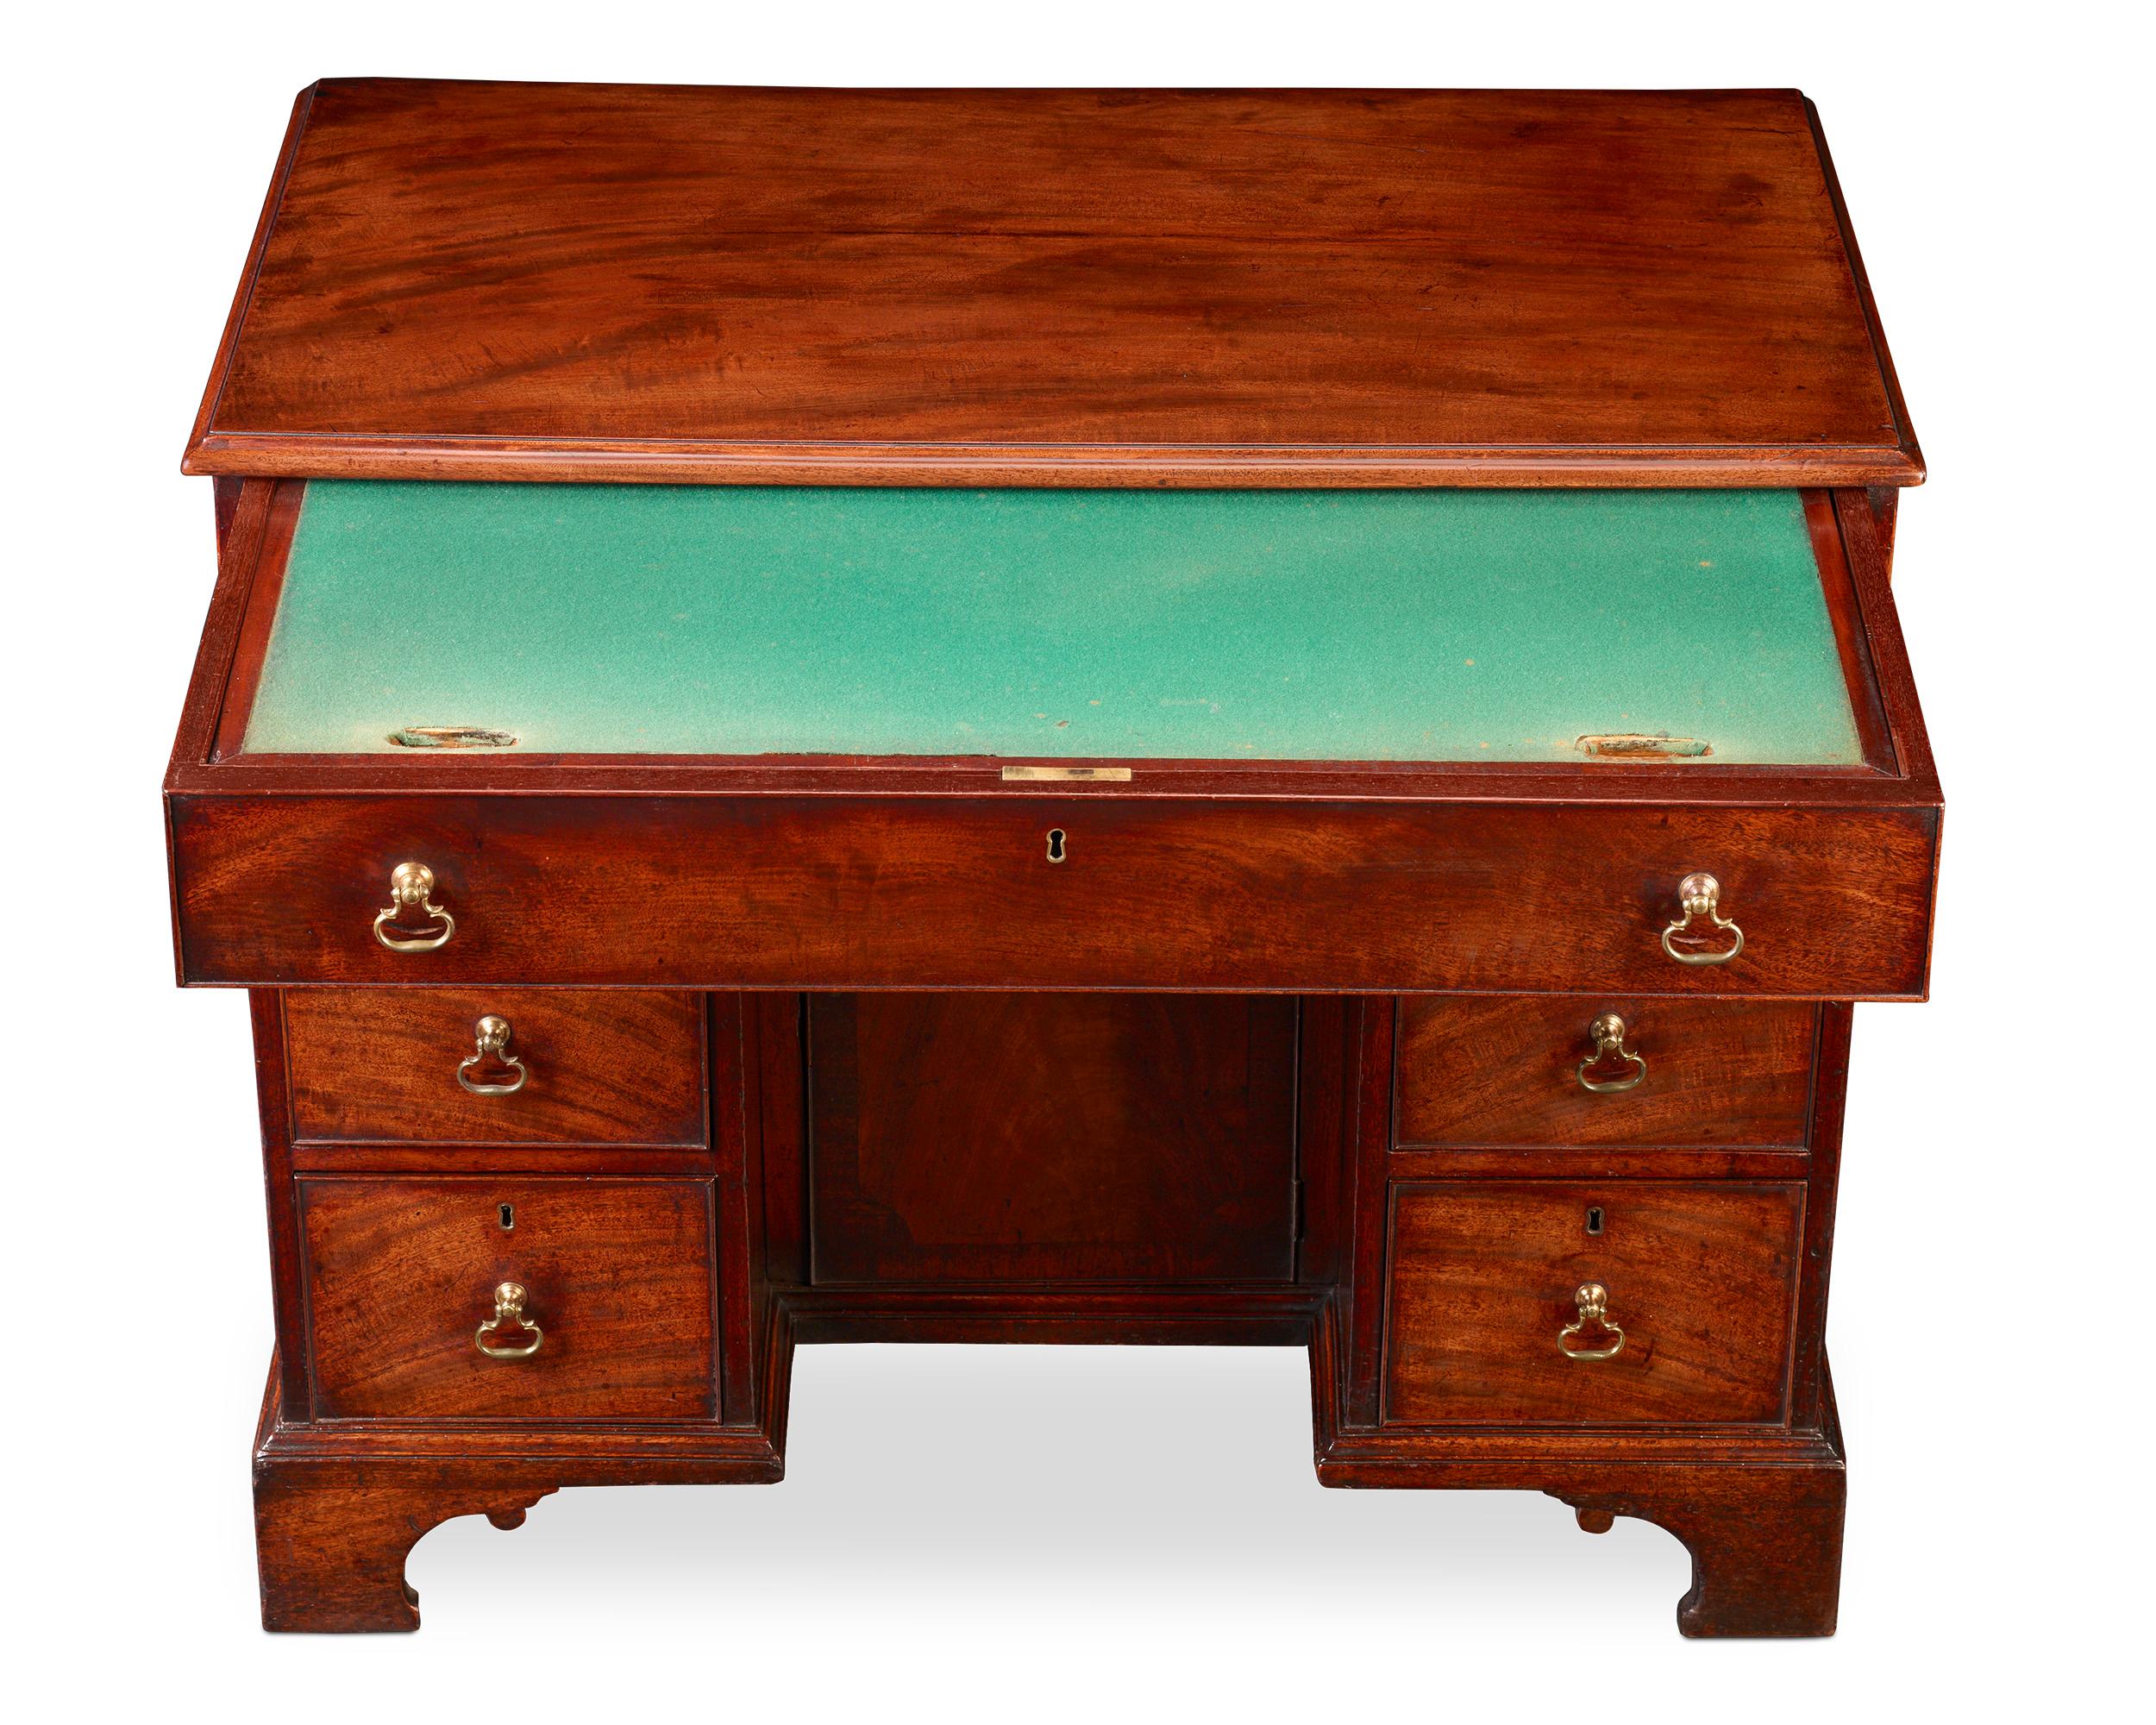 This exceptional kneehole dressing table by the workshops of Thomas Chippendale displays all of the hallmarks of furnishings crafted by the master’s hand. This mahogany table is complete with its original brass handles and bears Chippendale's